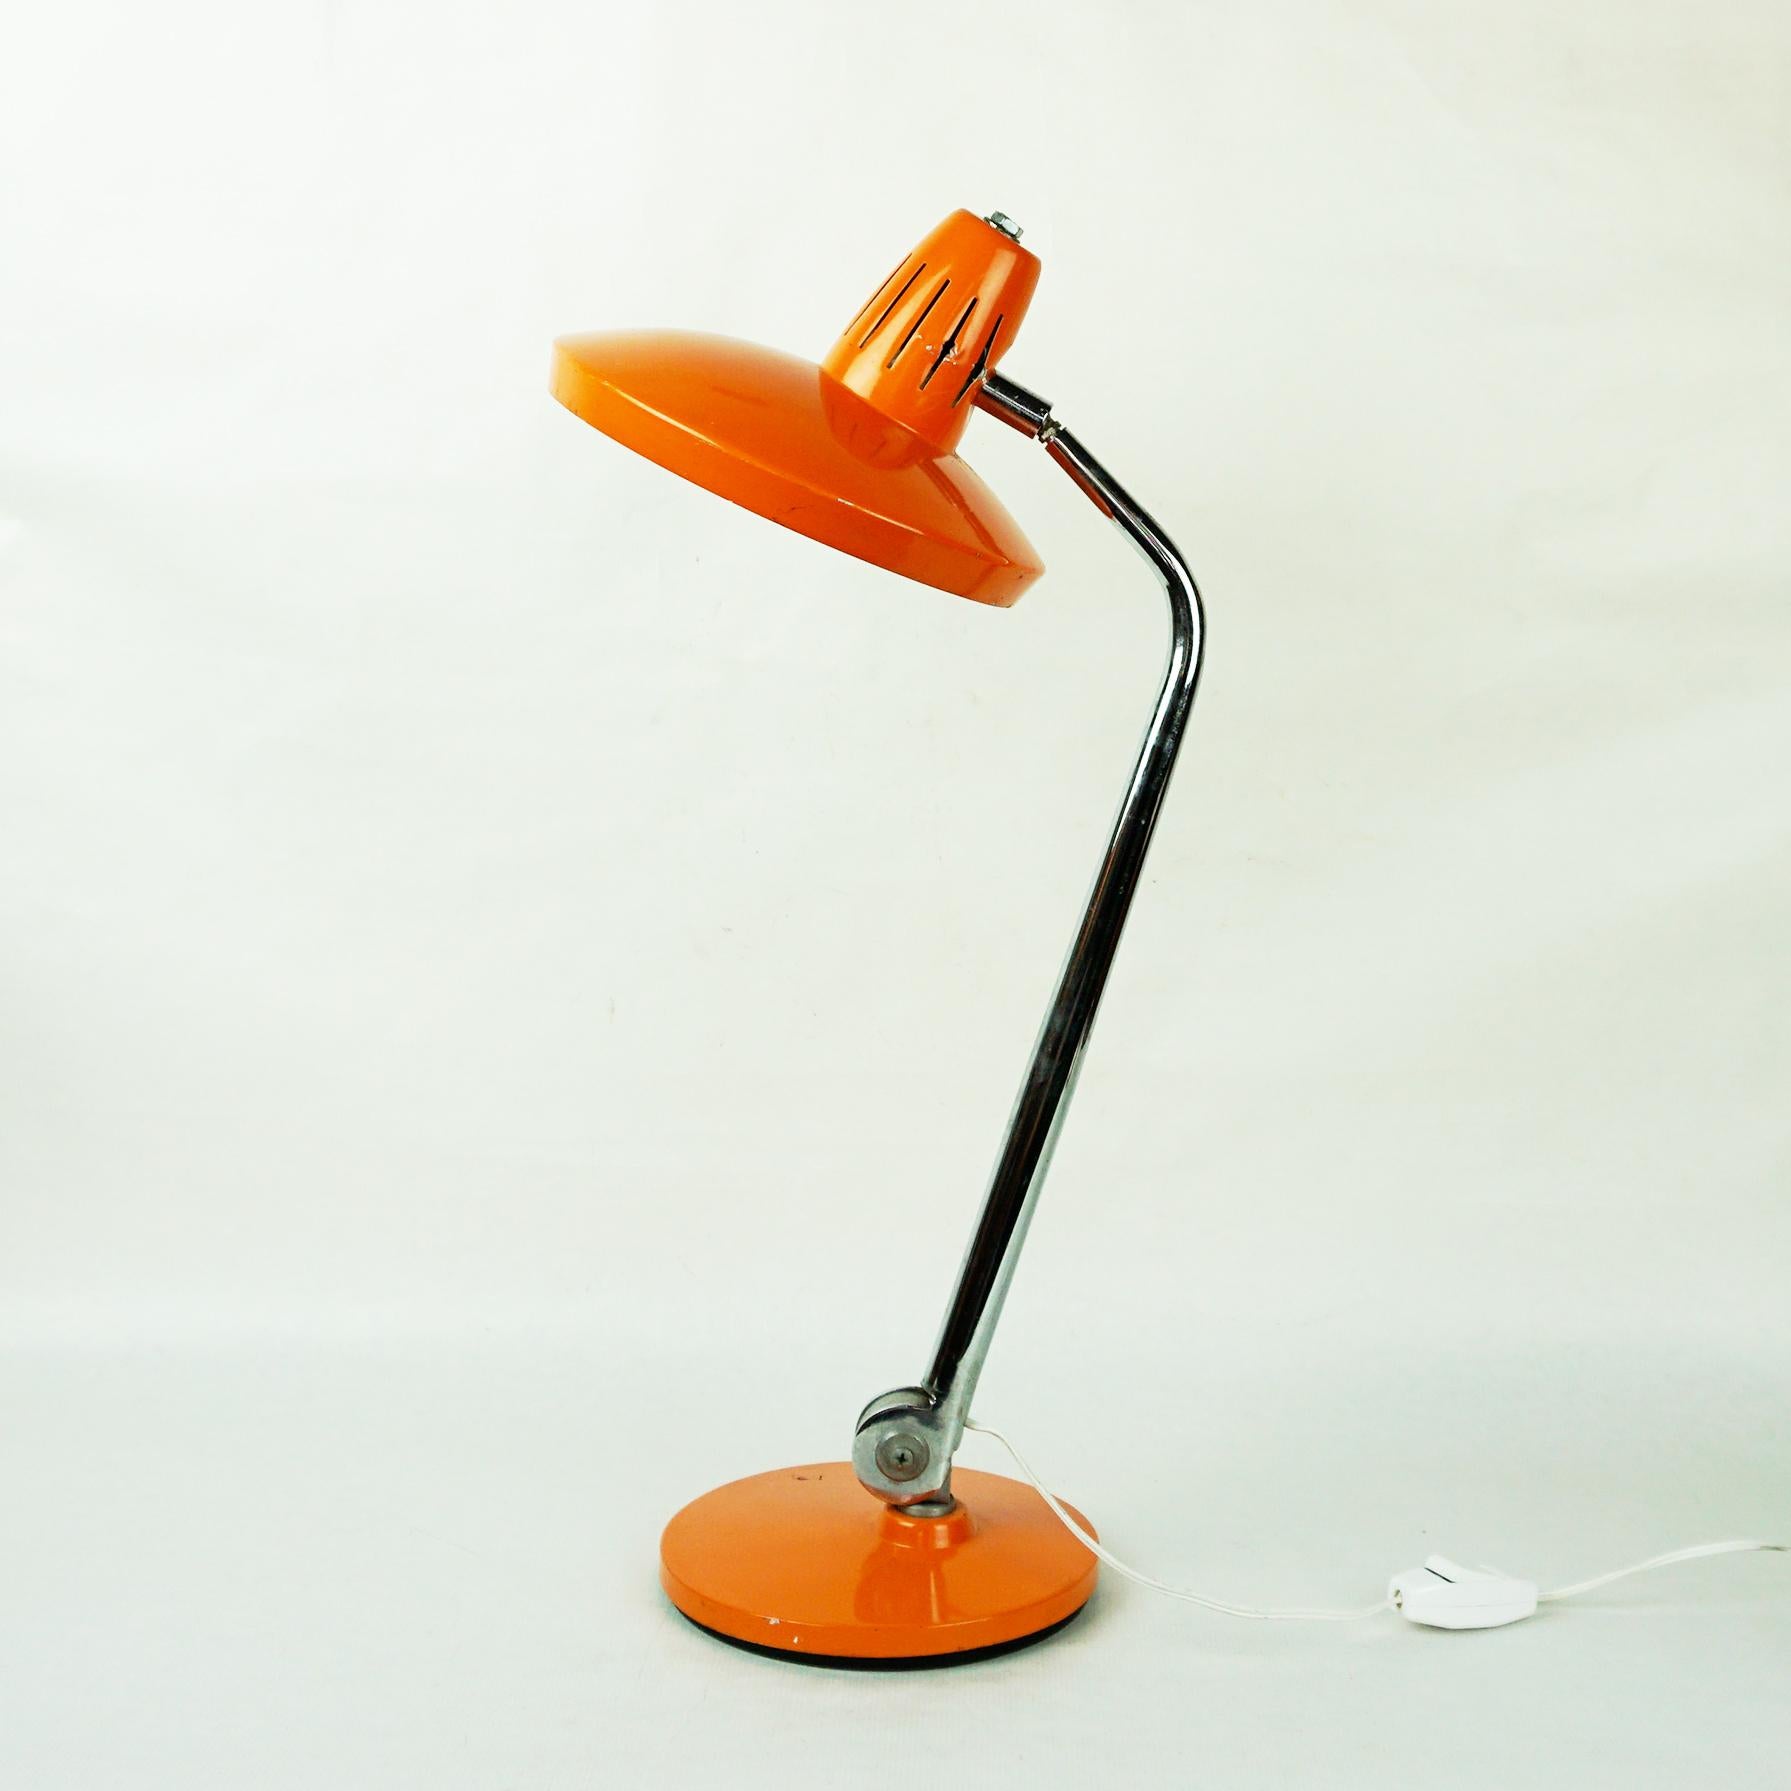 Iconic orange lacquered Desk Lamp produced by Fase Madrid Spain in the 1960s, the Model is called Fazo. It features a 360 swivelling base and 360 rotating shade. Marked Fase on the underside. 
So this light is adjustable in a lot of positions. All